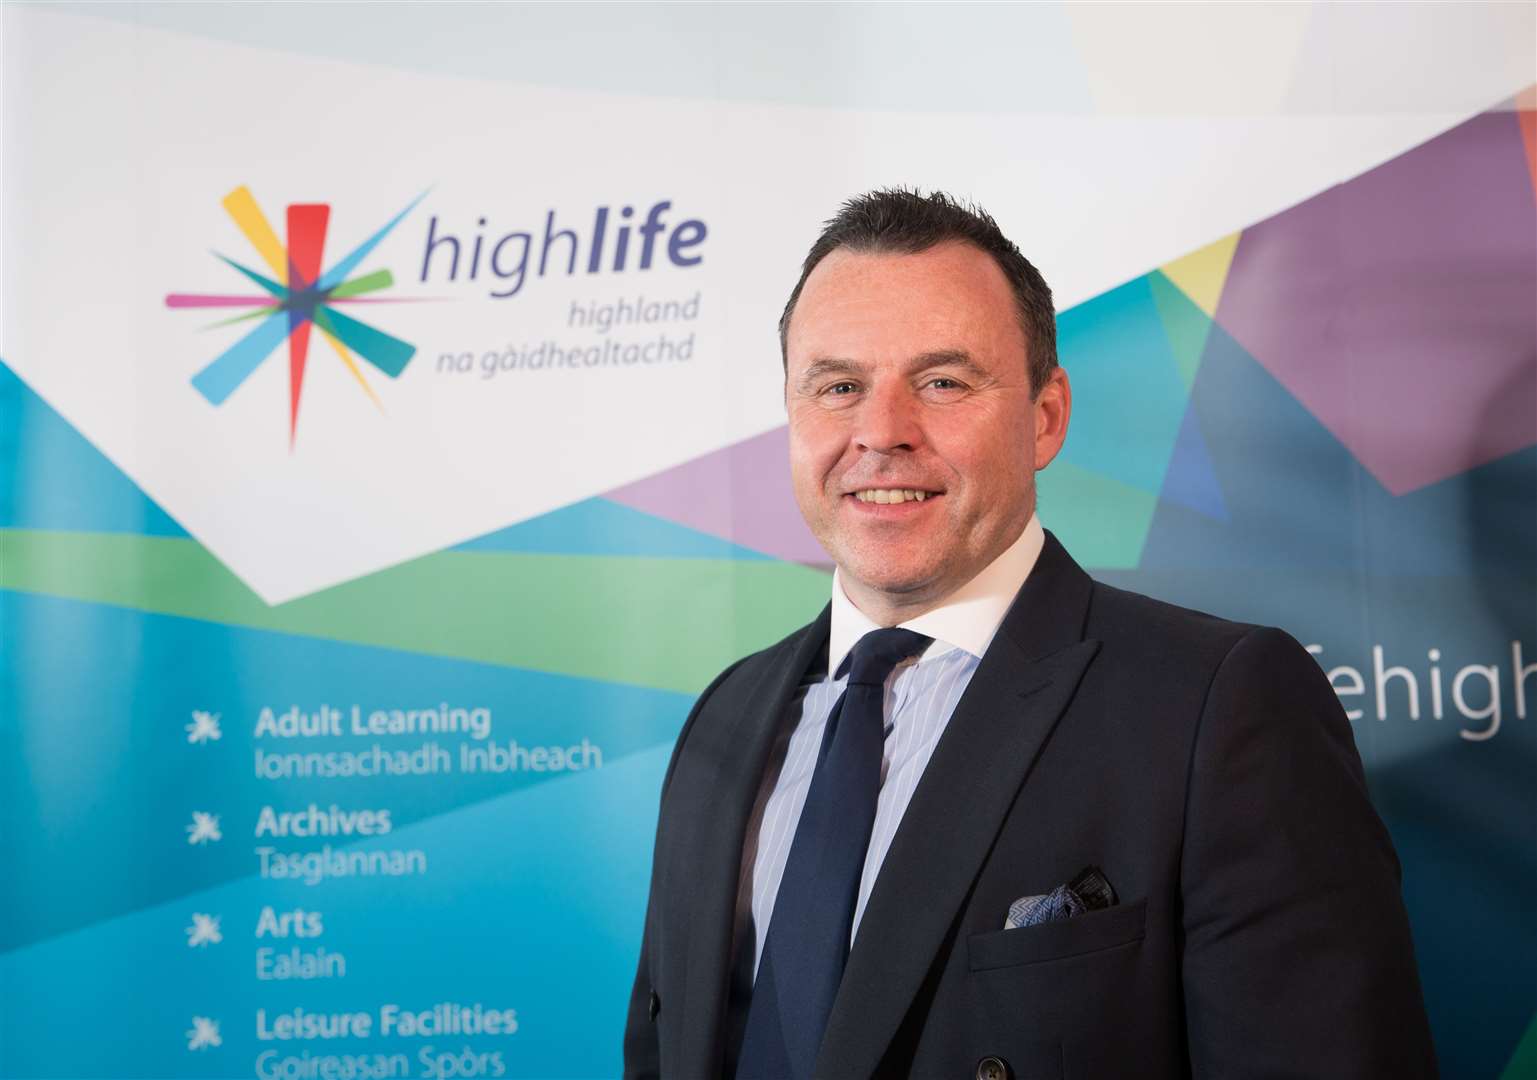 Chief executive Steve Walsh says High Life Highland staff are aiming to deliver an enjoyable and safe experience when they welcome customers back.